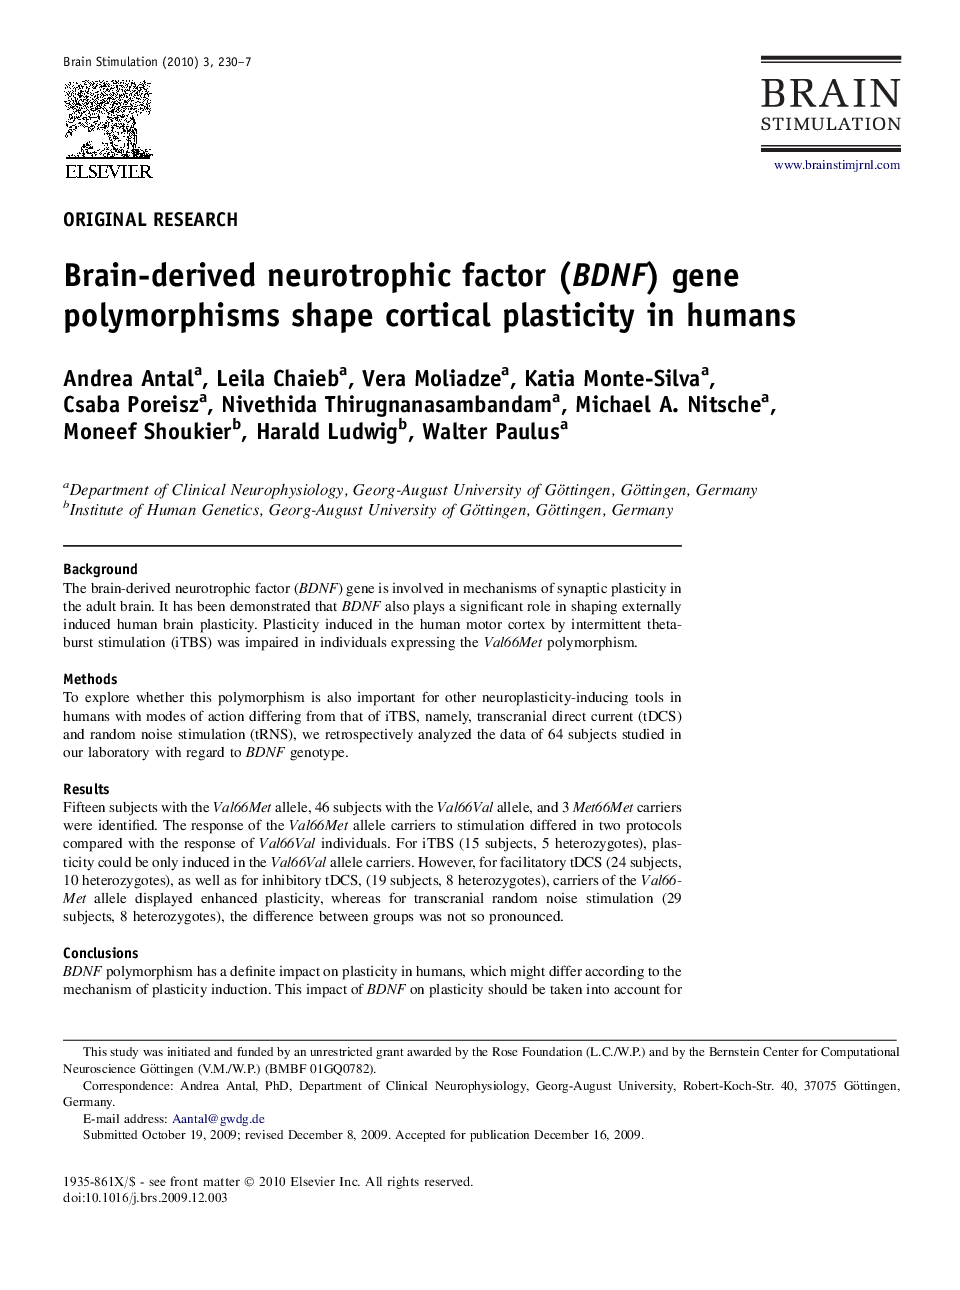 Brain-derived neurotrophic factor (BDNF) gene polymorphisms shape cortical plasticity in humans 